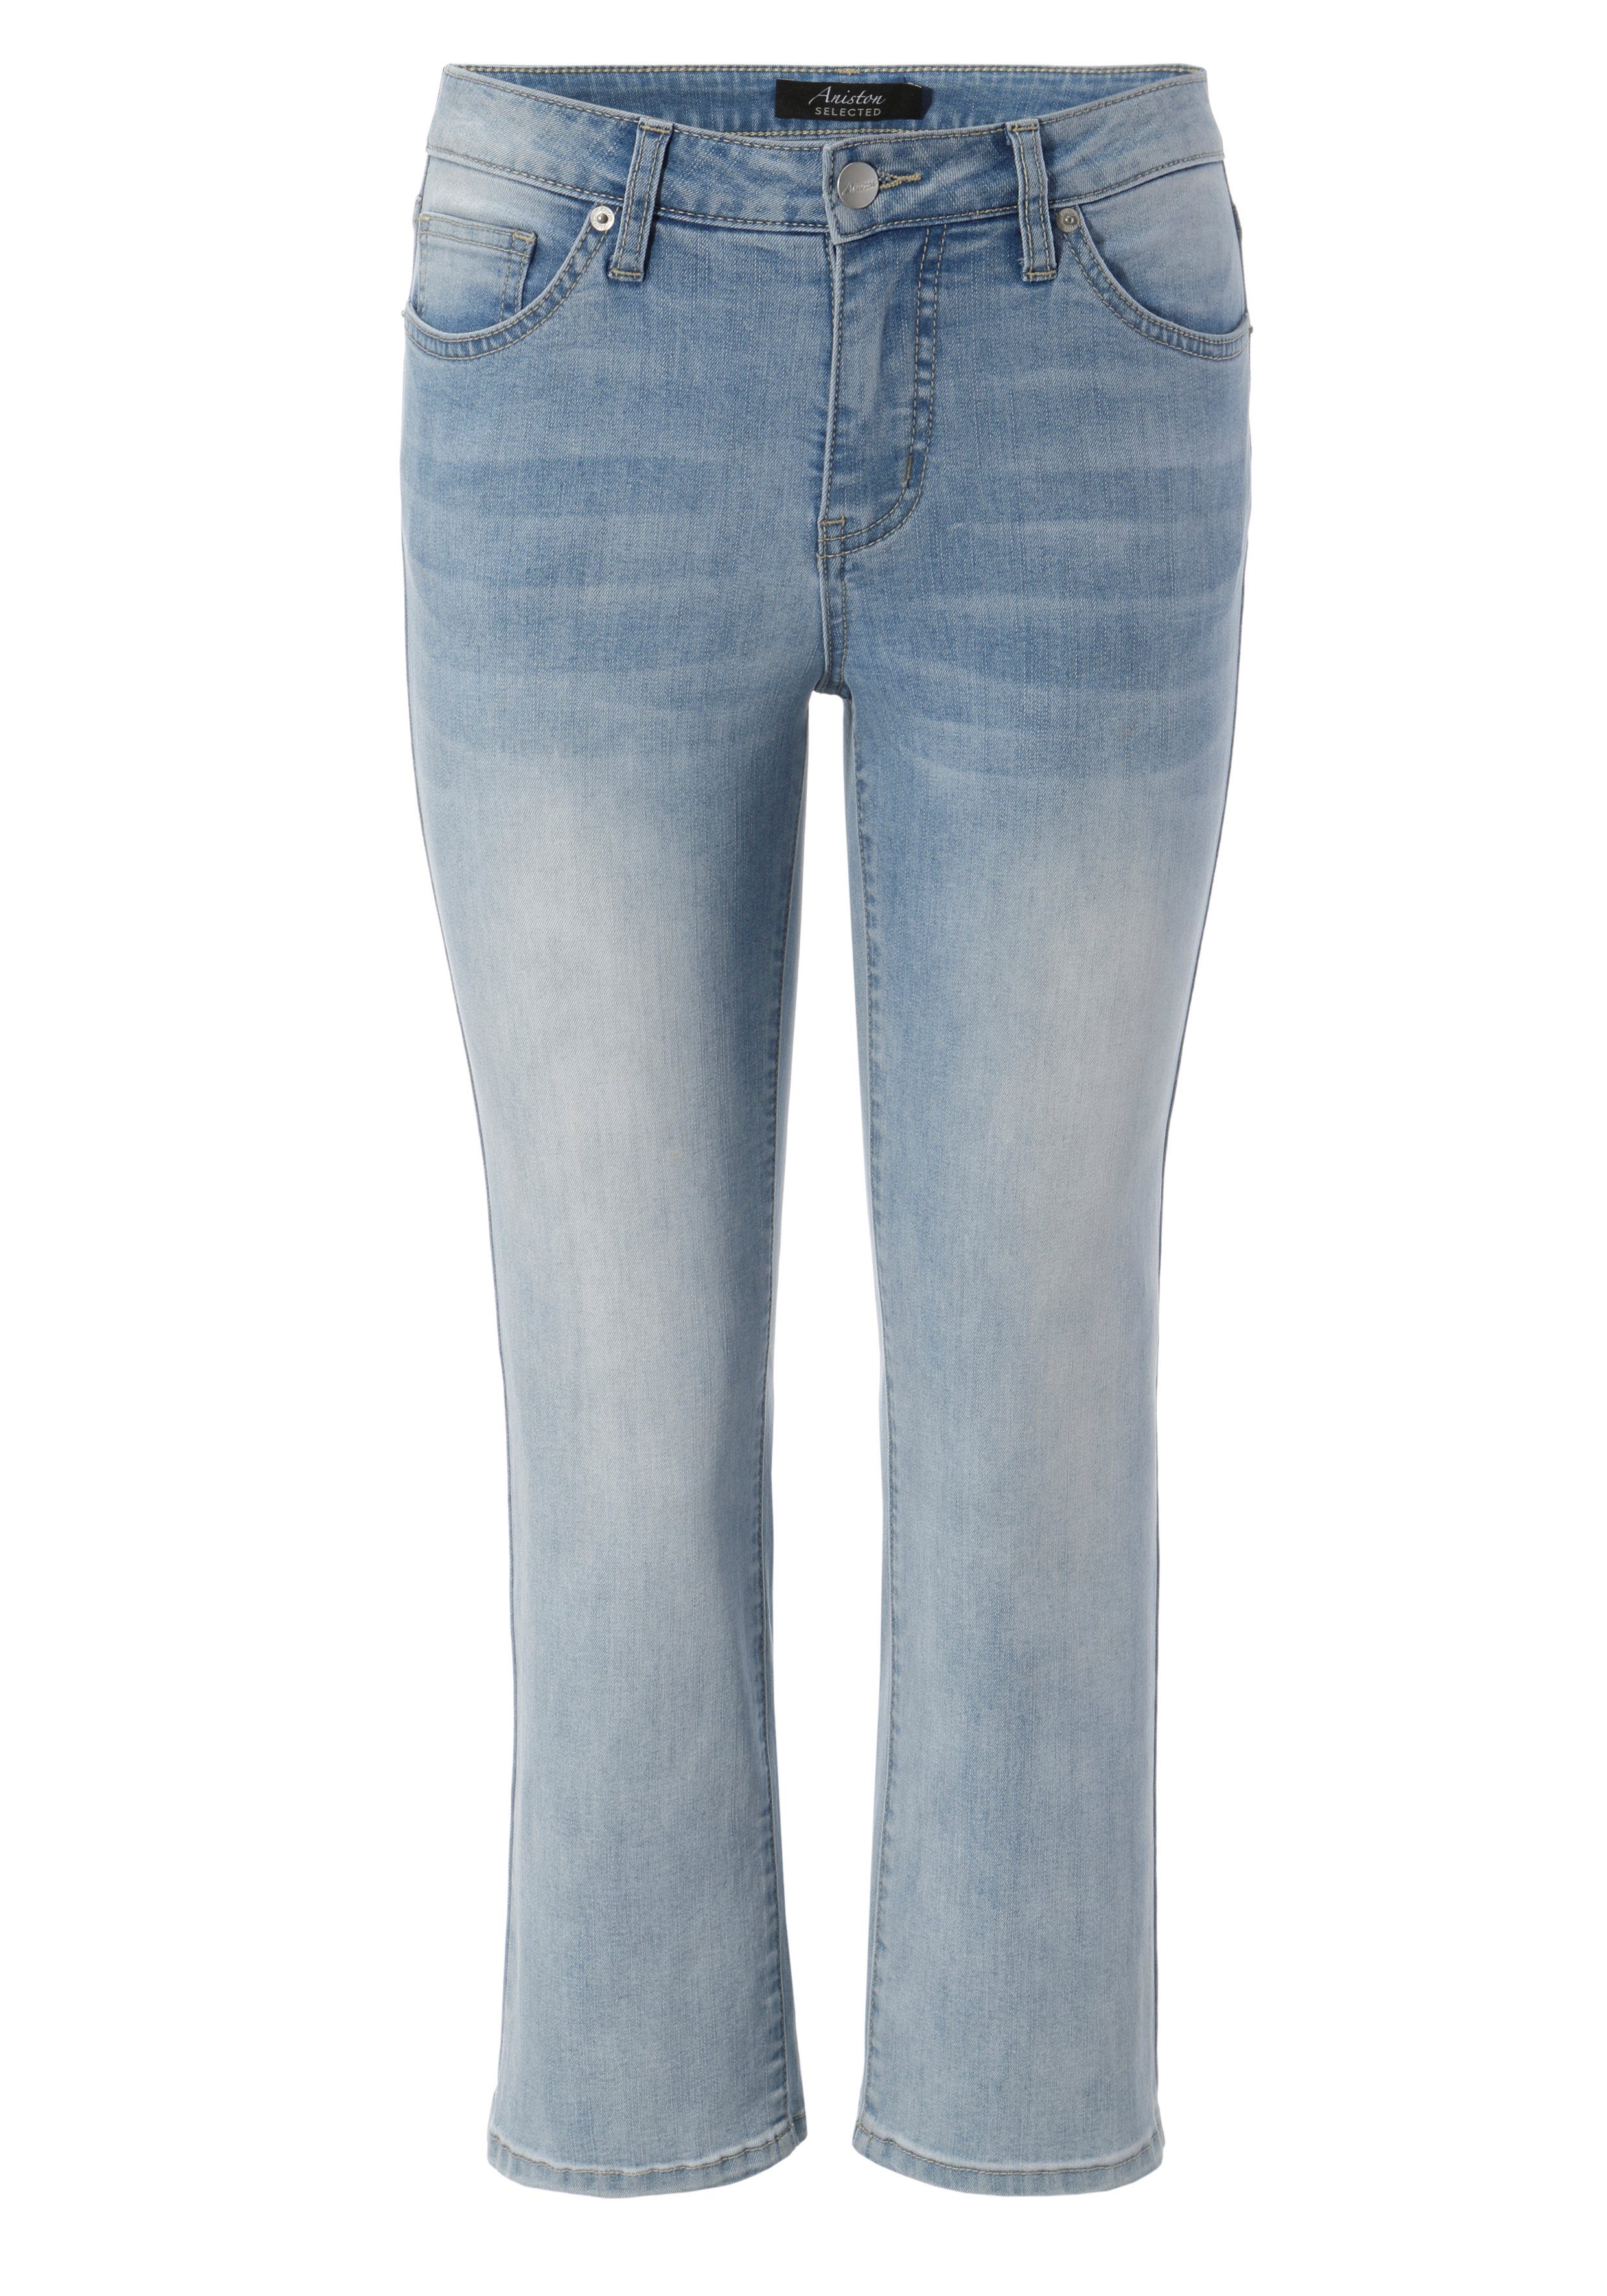 light-blue-washed in SELECTED cropped Länge Straight-Jeans Aniston verkürzter